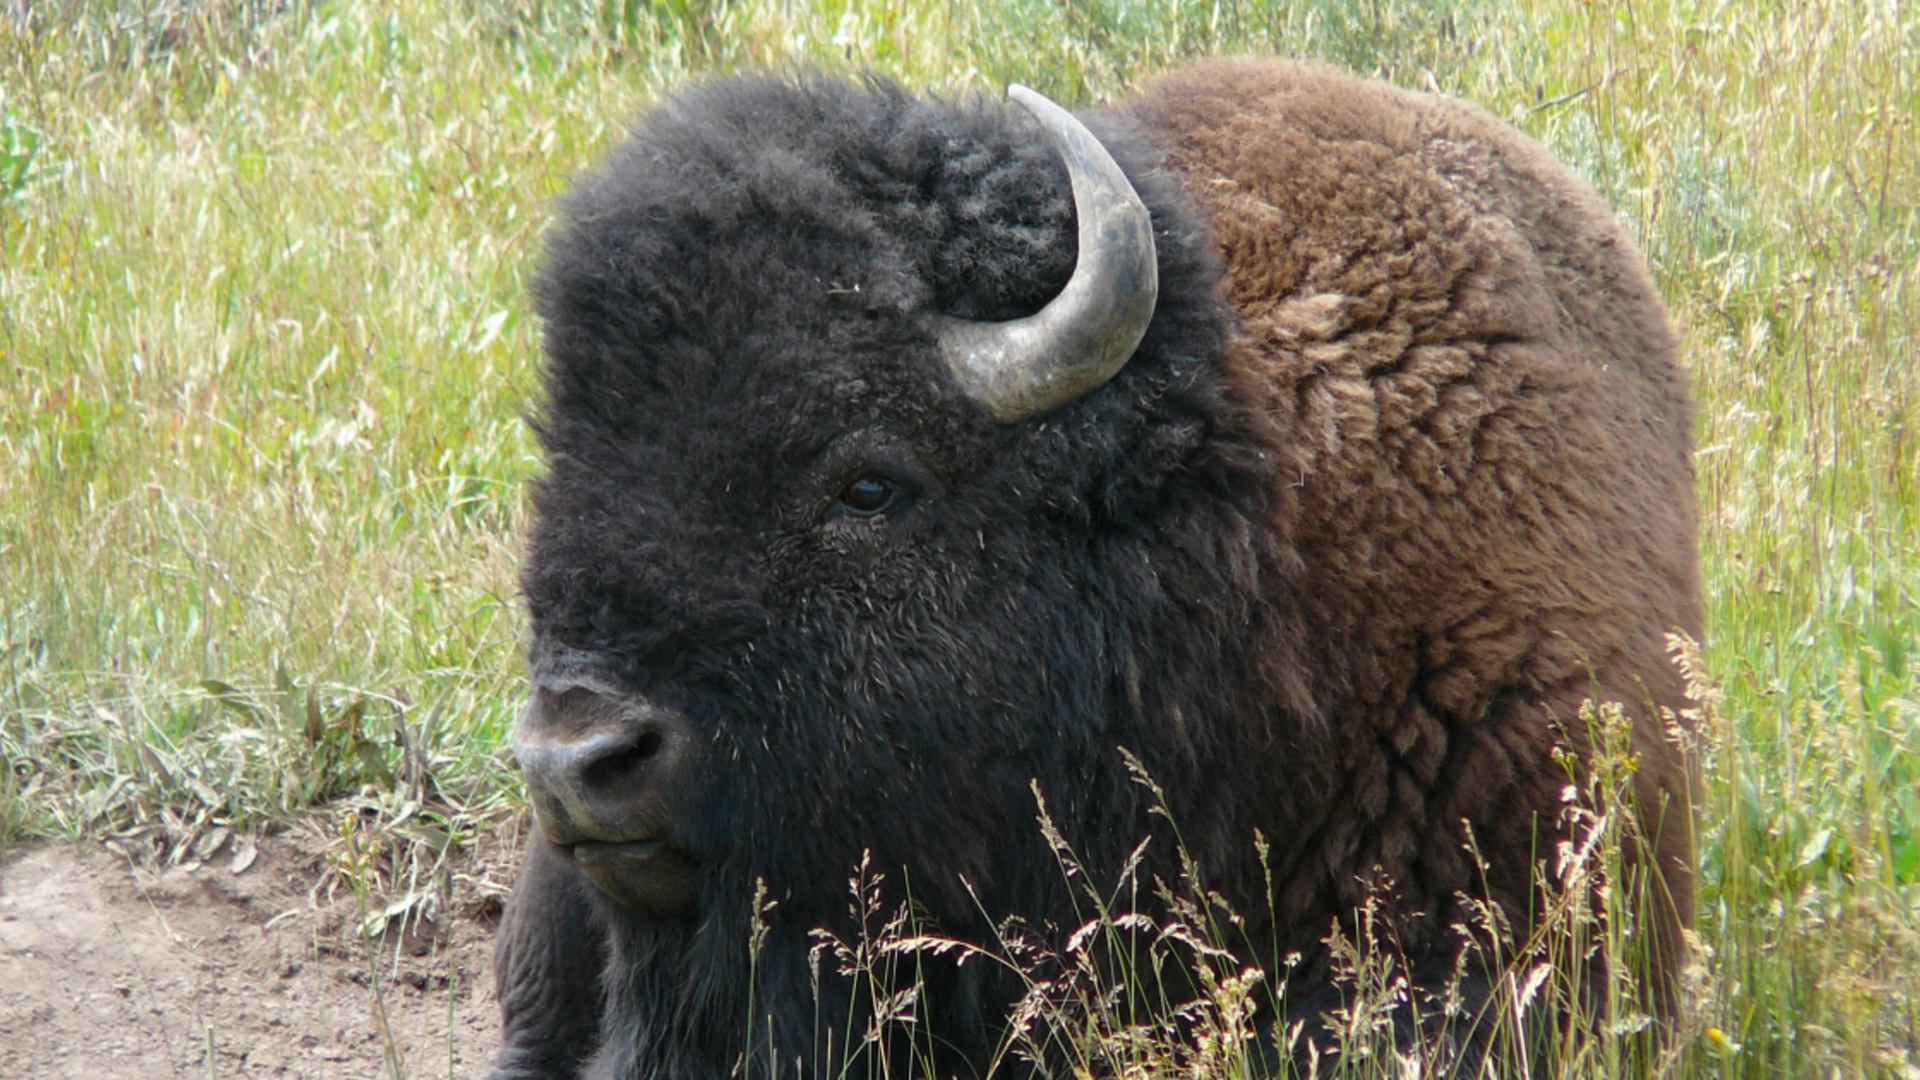 USFWS Completes Initial Review to Protect Yellowstone Bison Under Endangered Species Act